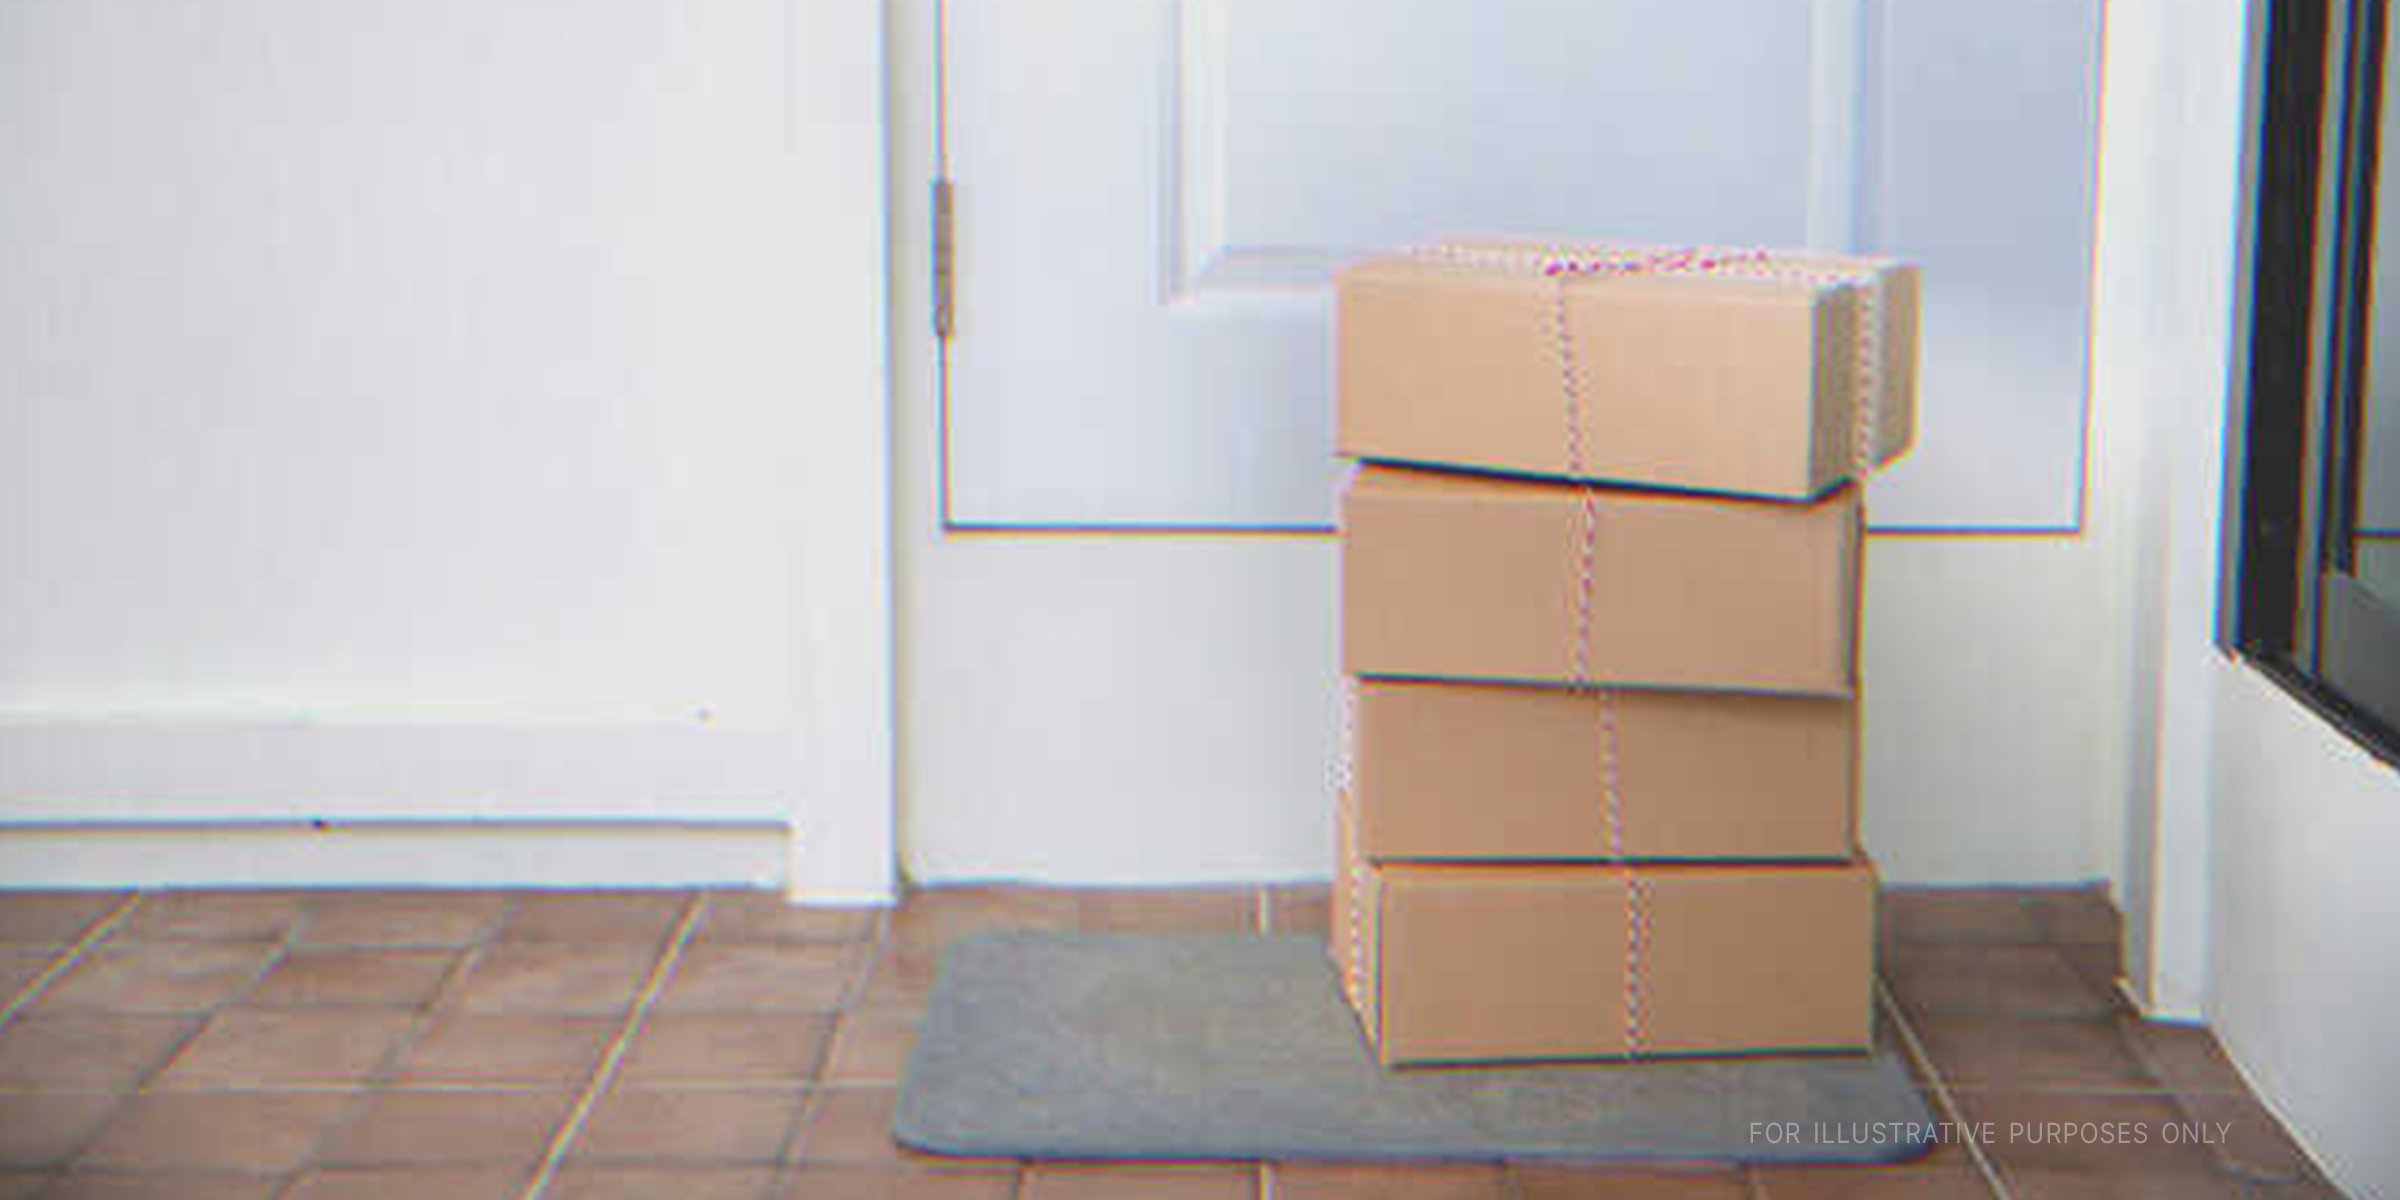 A stack of four boxes on a doorstep | Shutterstock